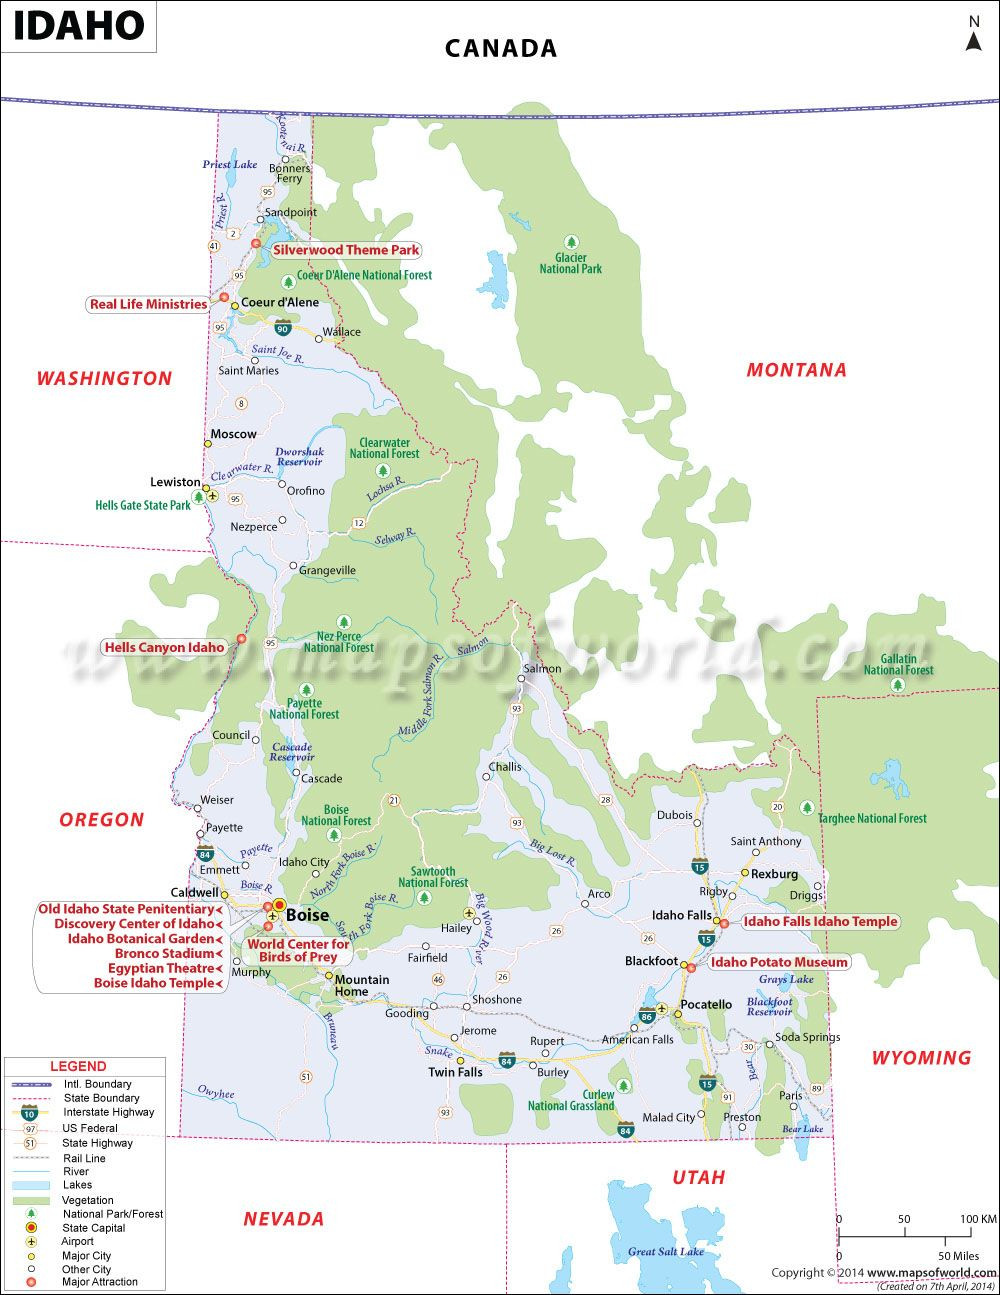 Idaho map showing the major travel attractions including cities